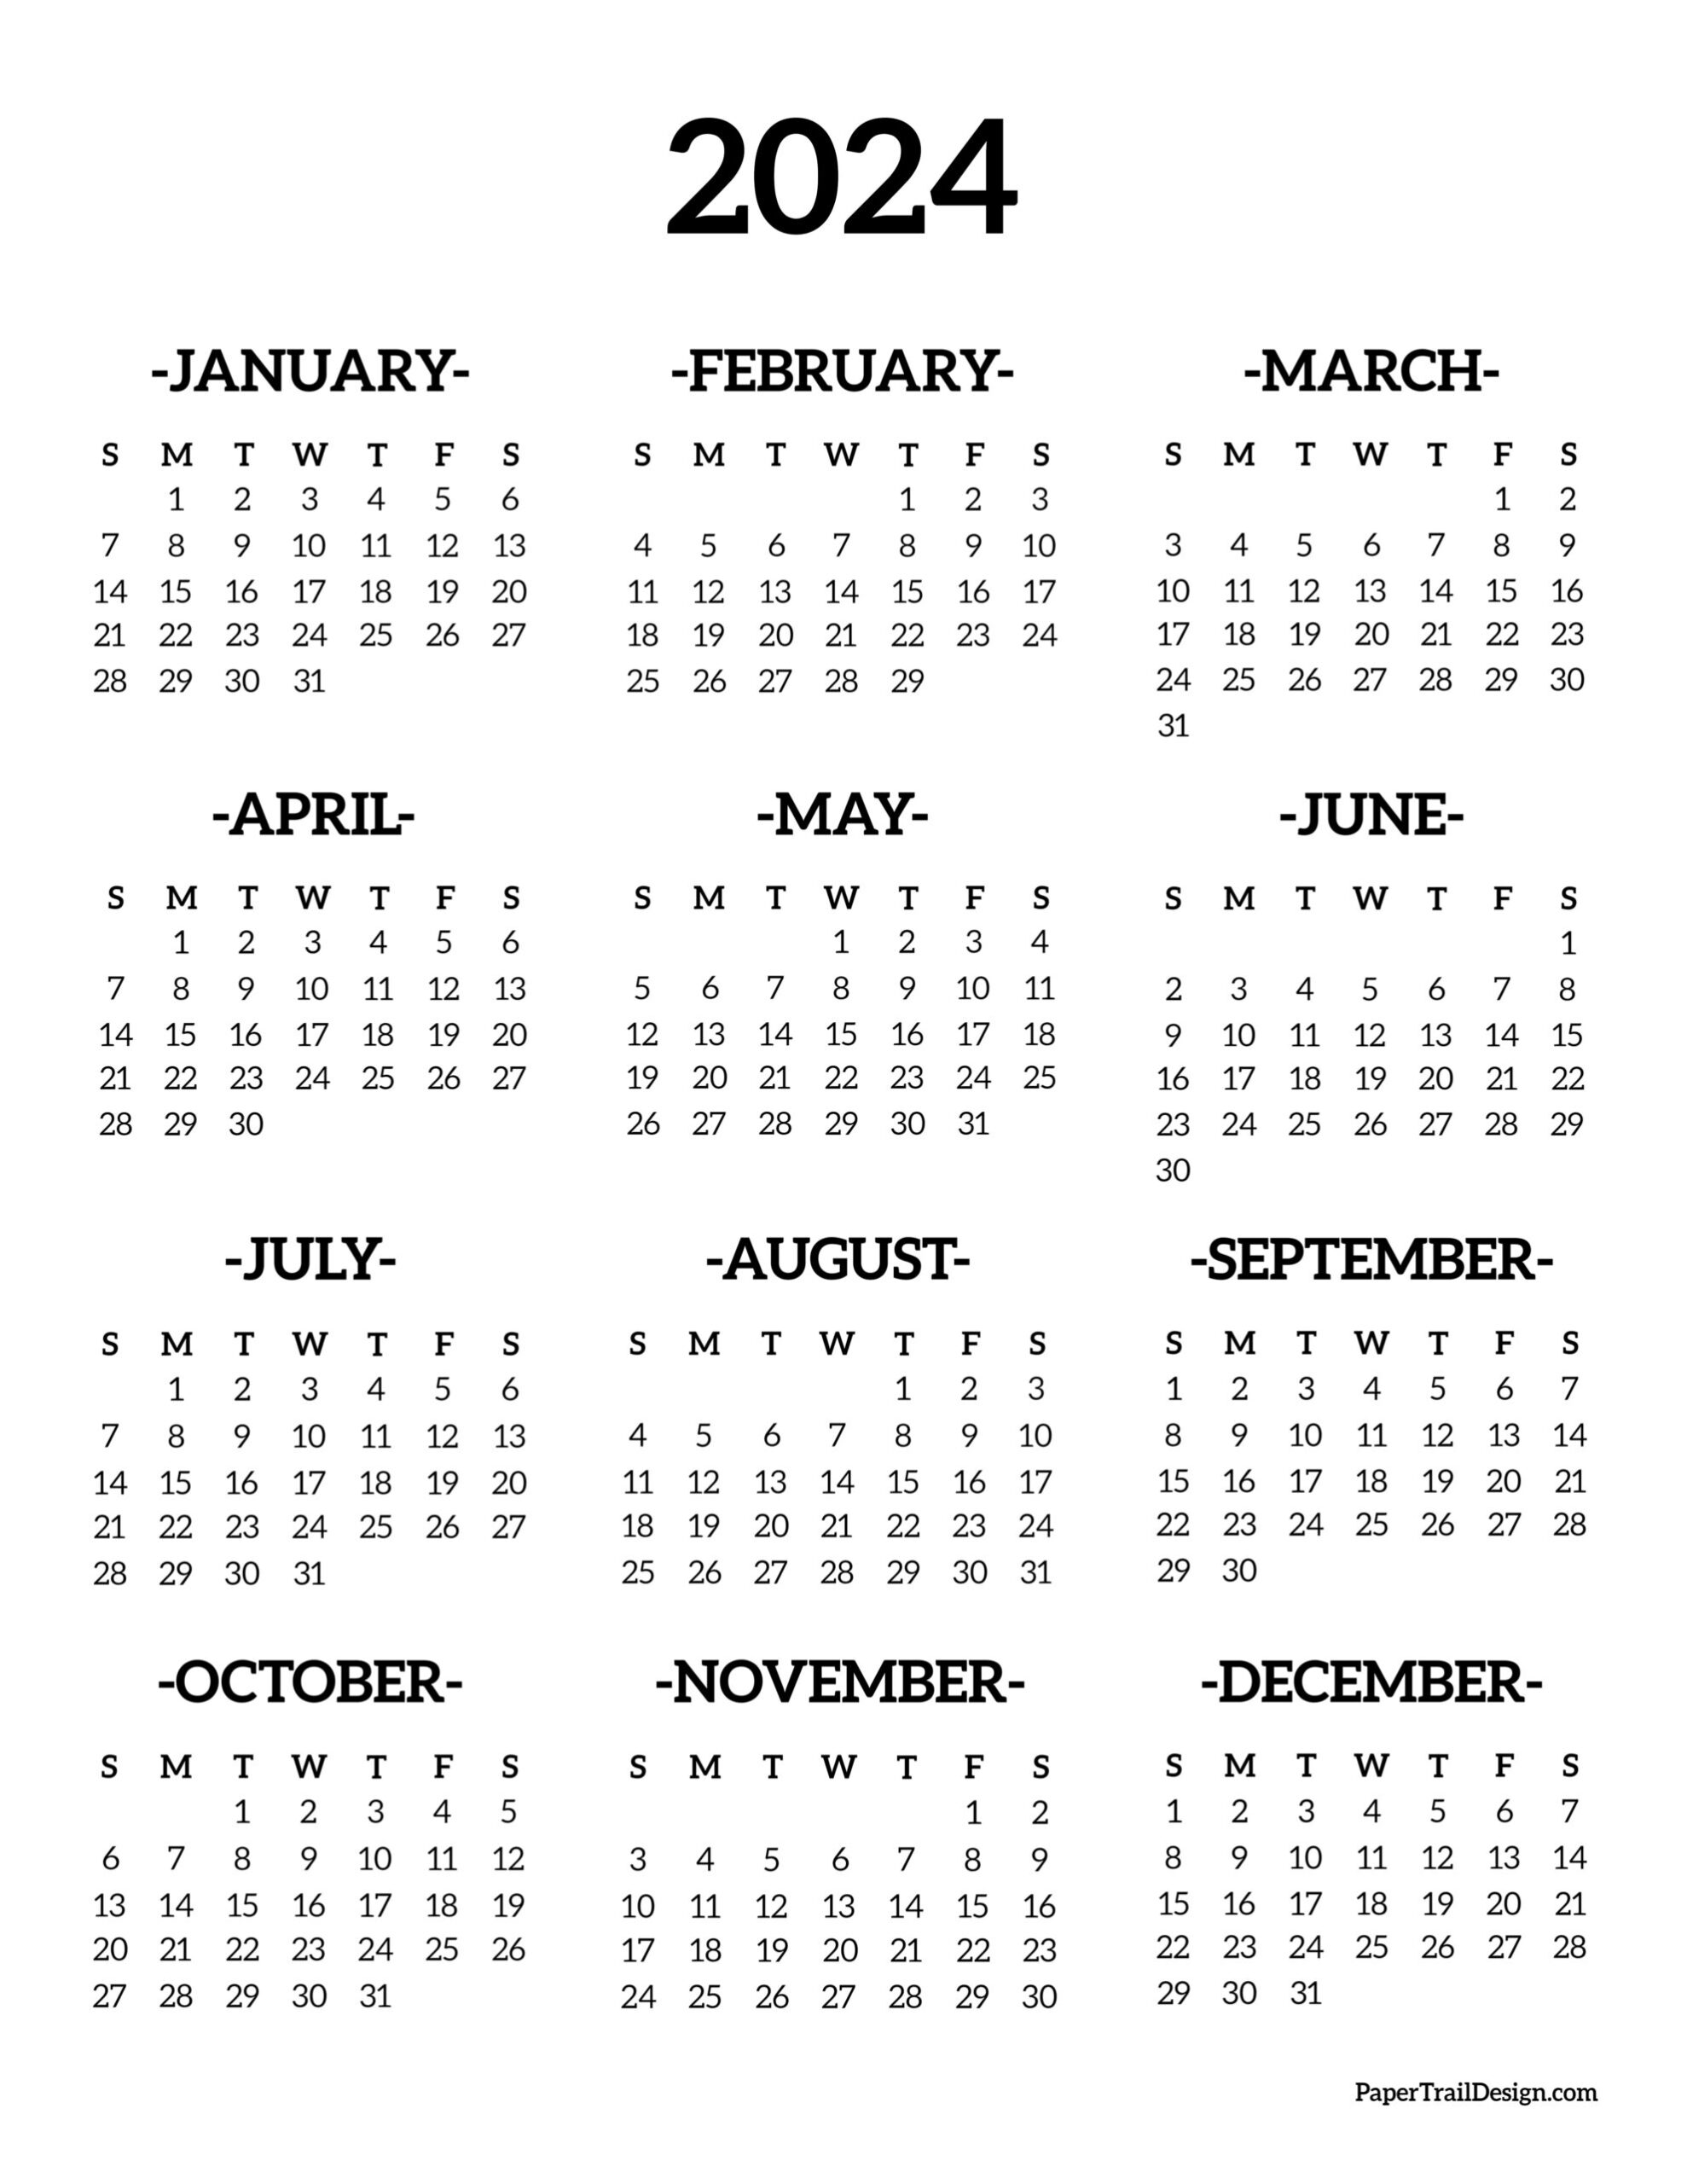 Calendar 2024 Printable One Page - Paper Trail Design for 2024 Calendar Printable For Kids